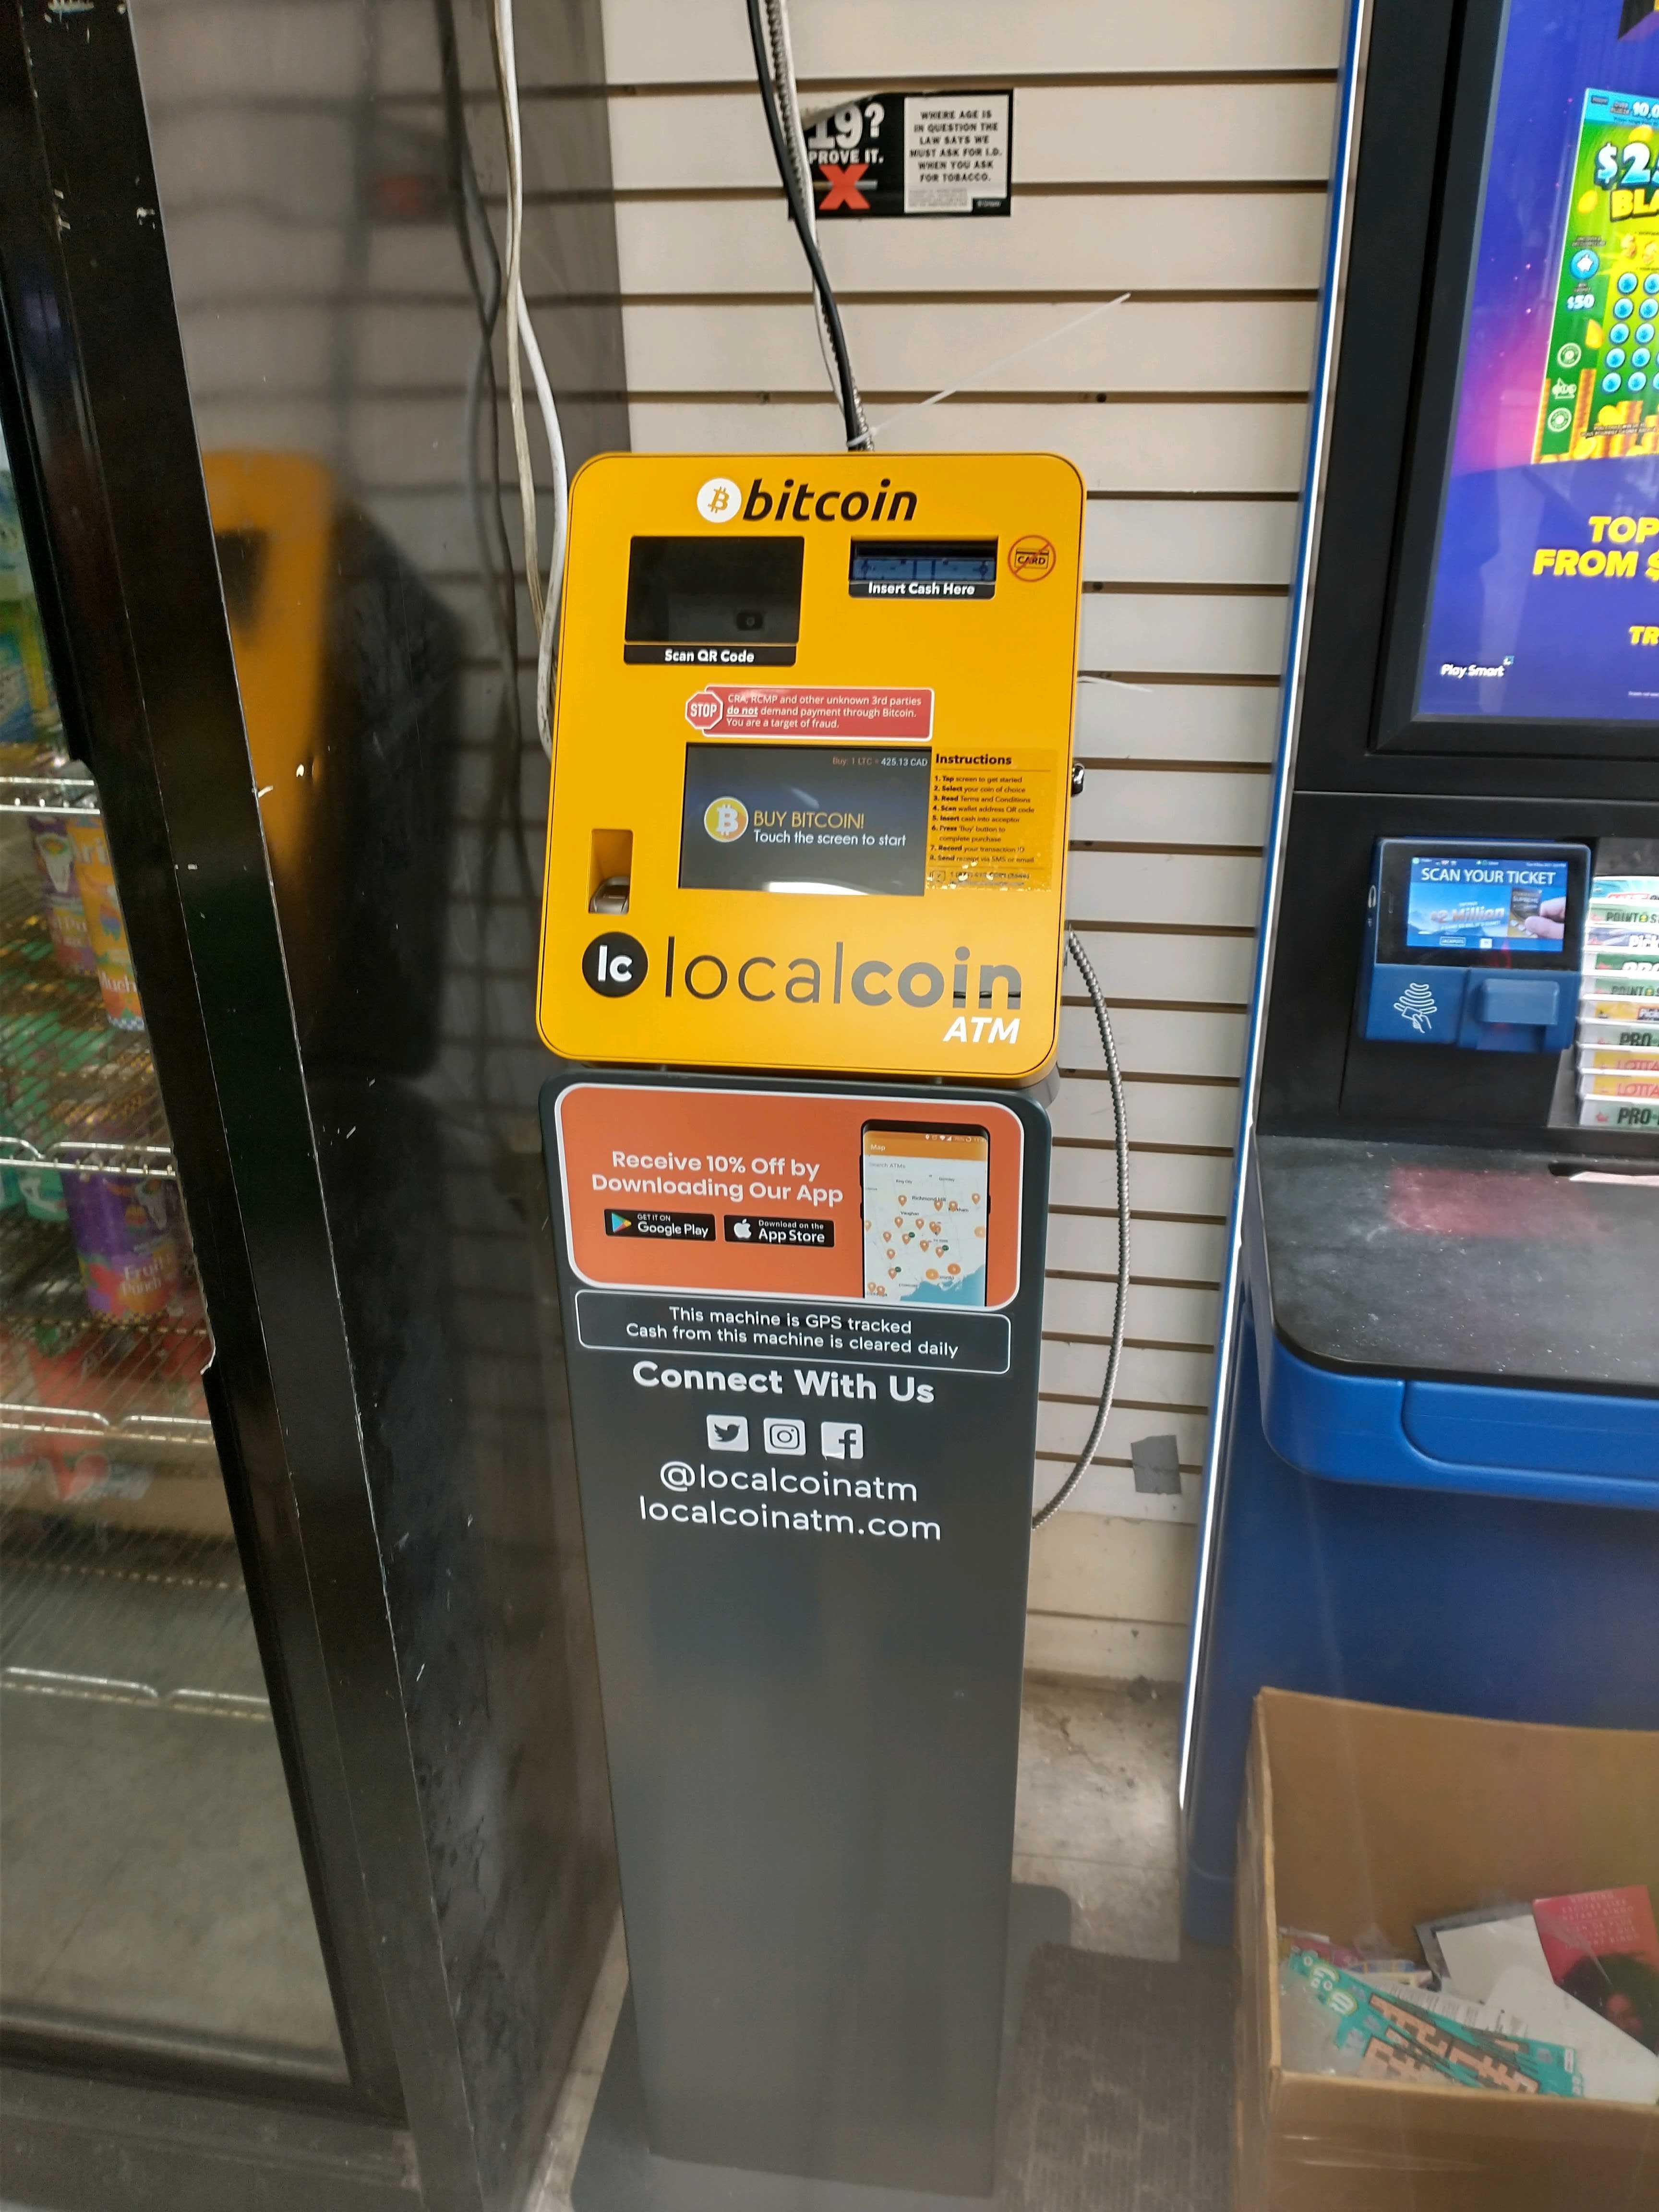 Images Localcoin Bitcoin ATM - West Bram A Convenience